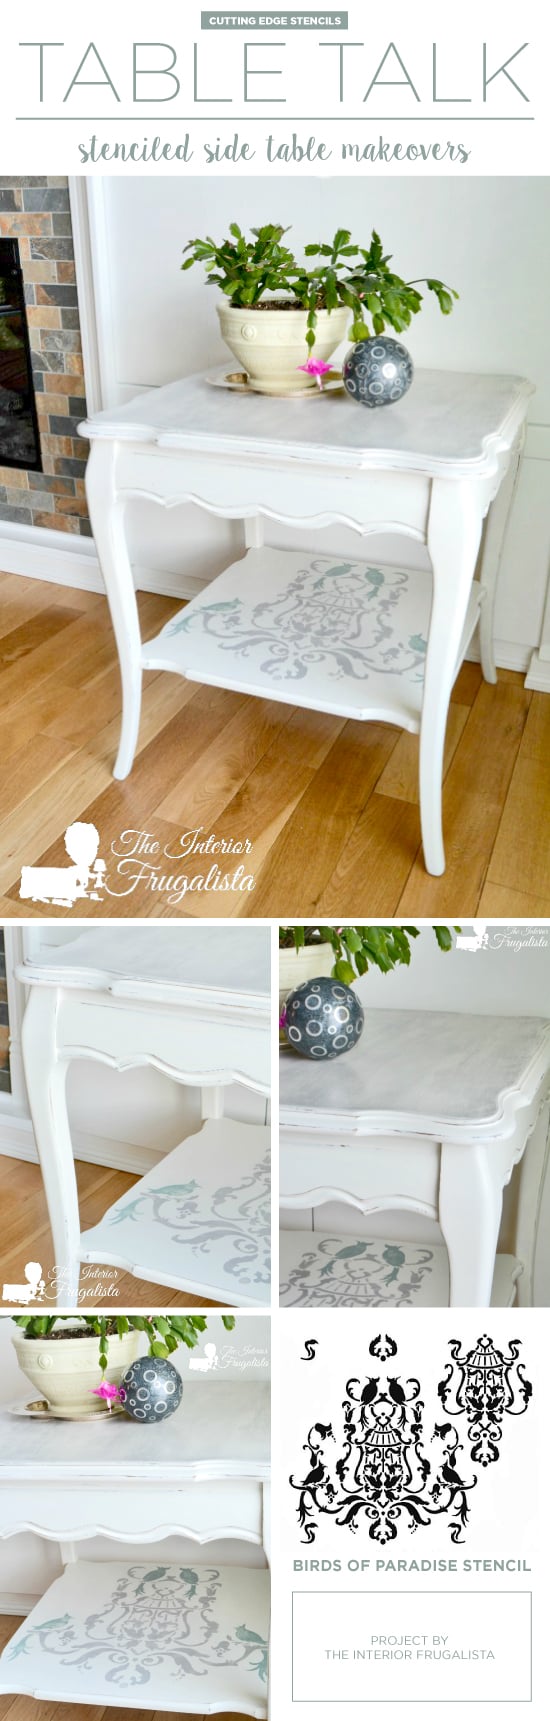 A DIY painted and stenciled side table makeover using the Birds of Paradise Stencil. http://www.cuttingedgestencils.com/birds-pattern-stencil.html